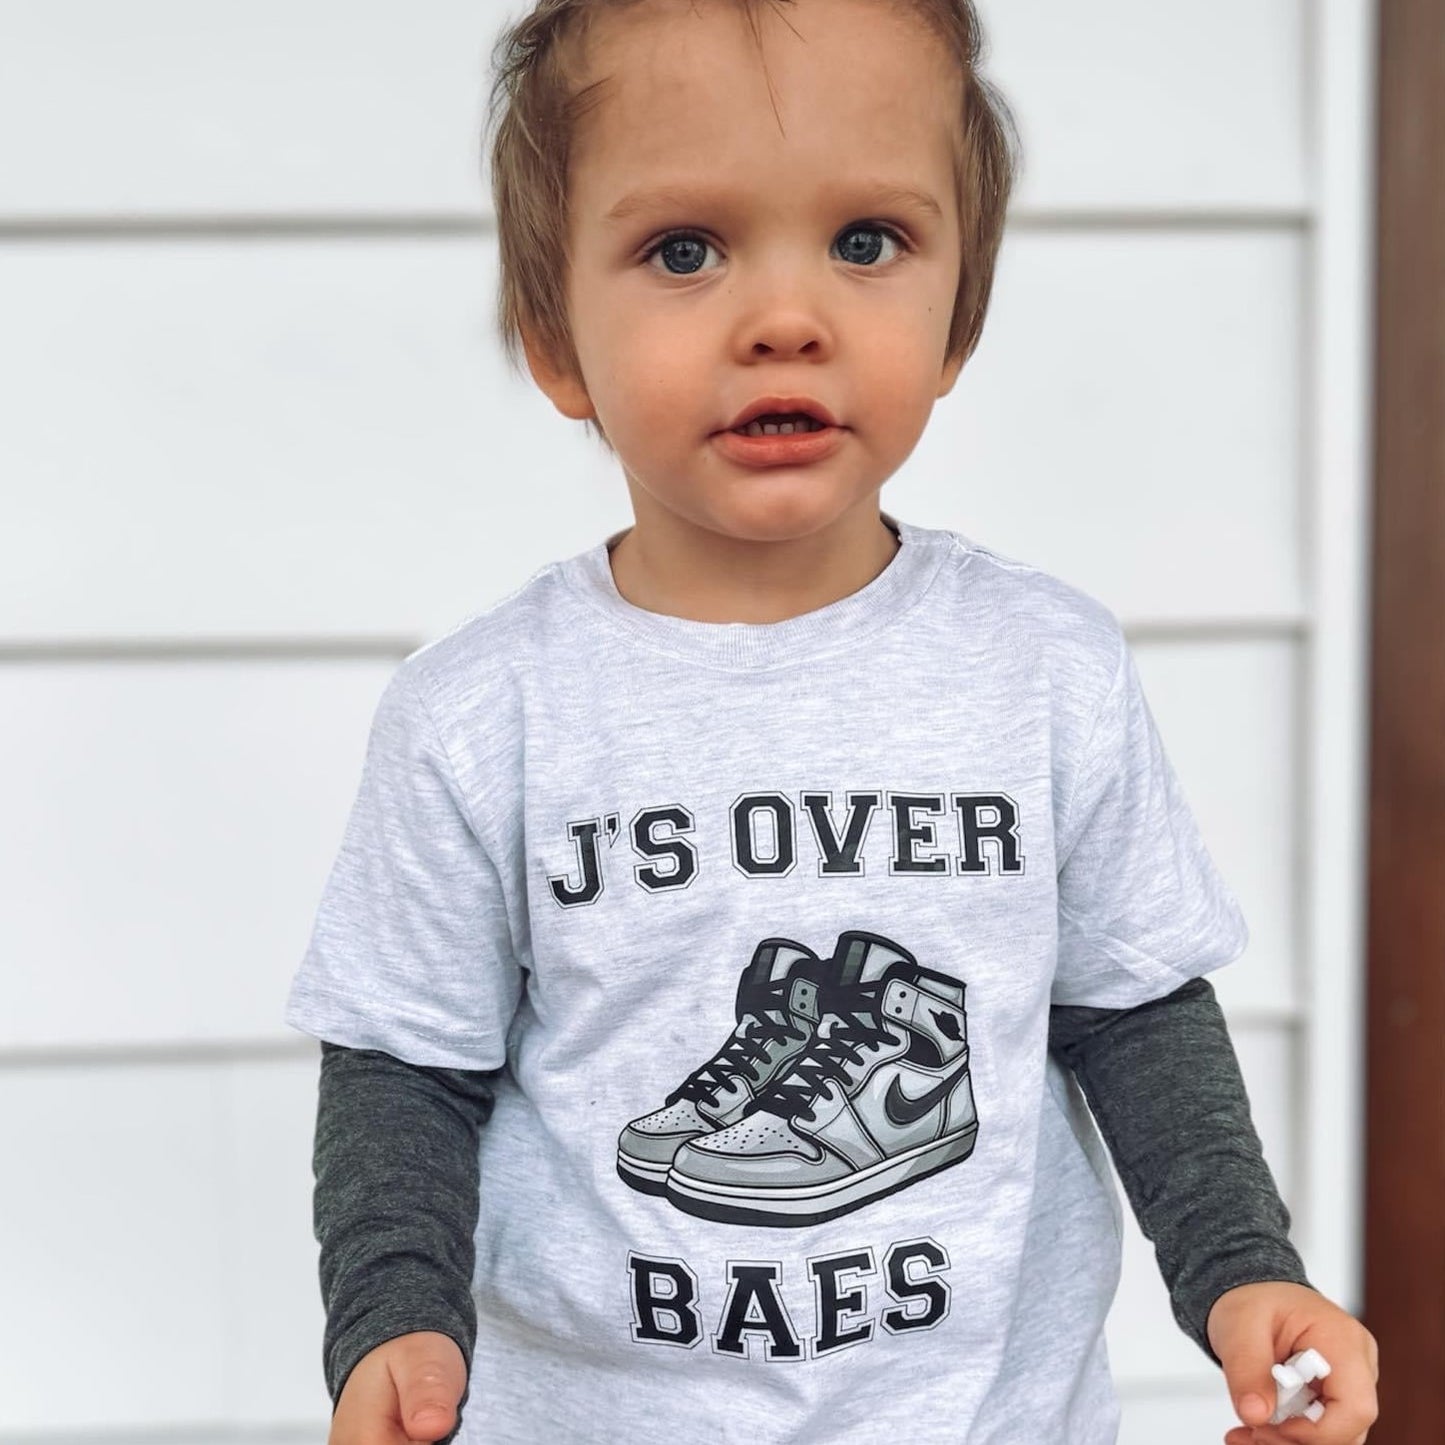 J's over Bae's | Grey Graphic T-shirt